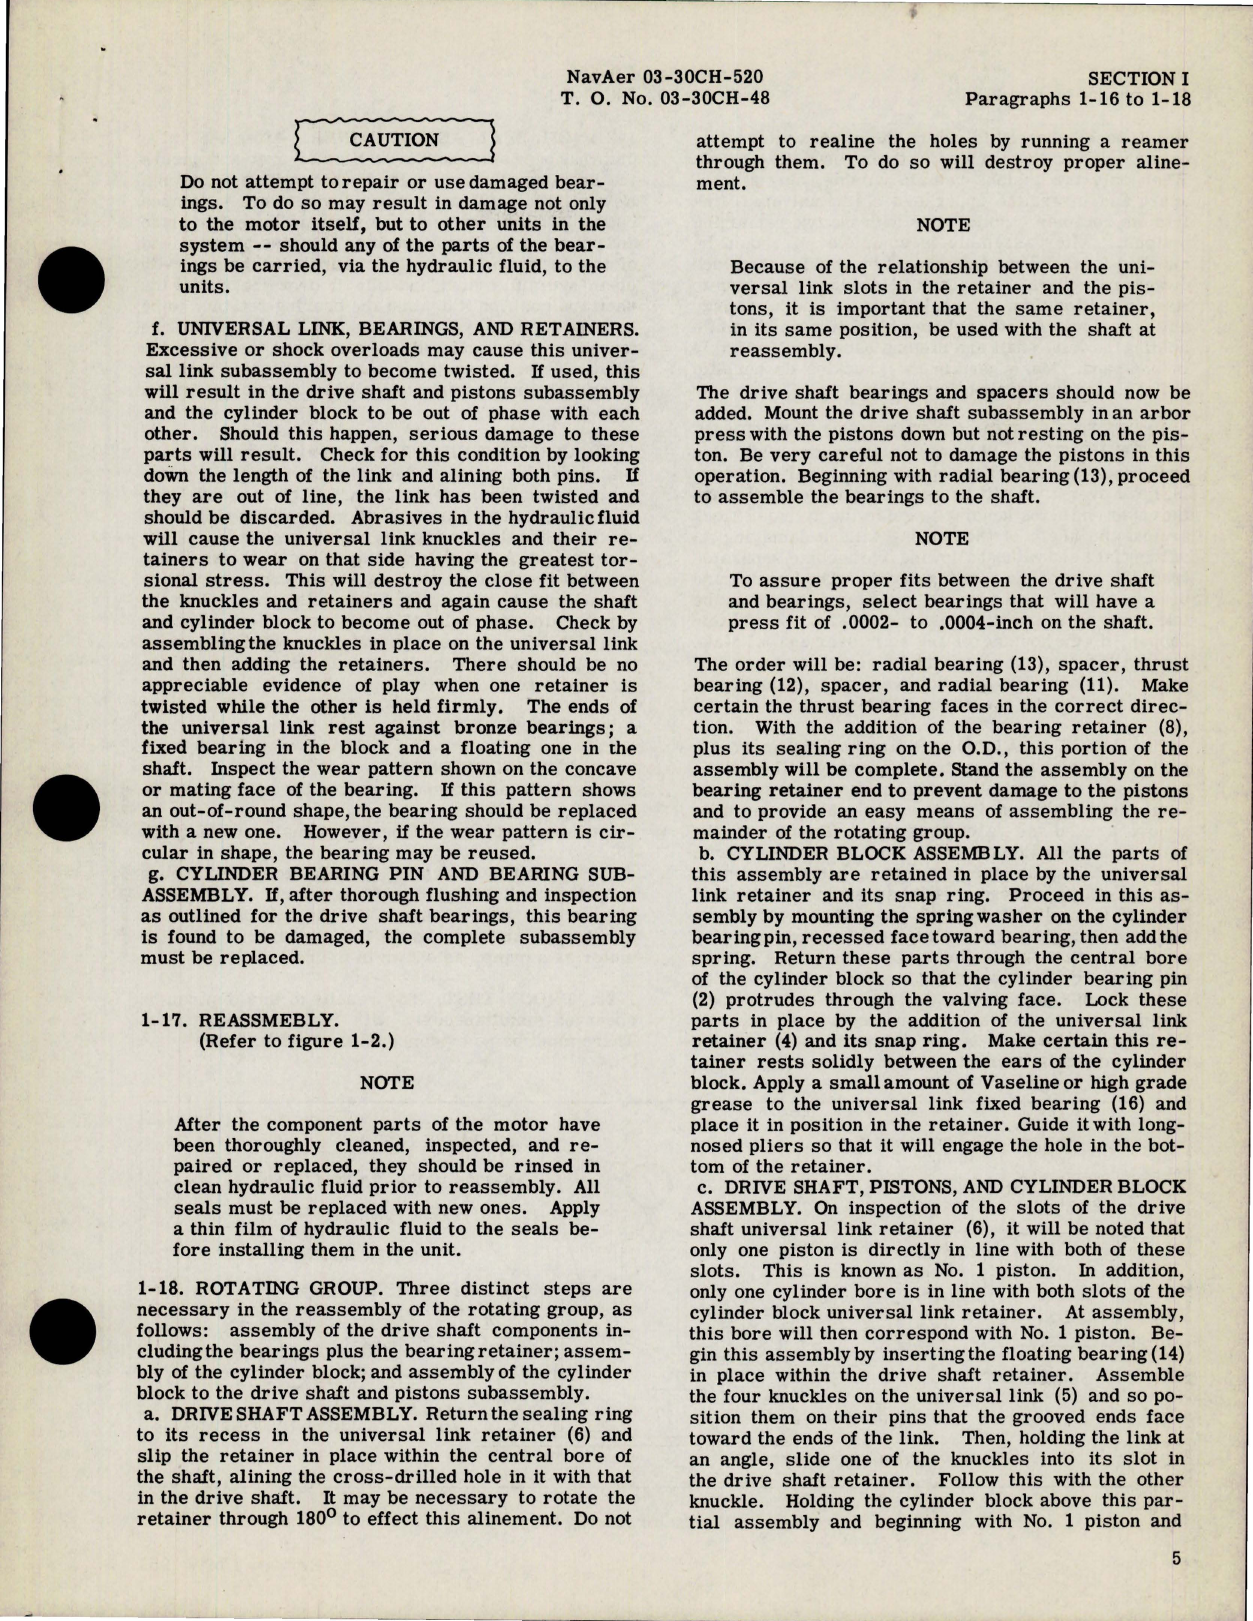 Sample page 7 from AirCorps Library document: Overhaul Instructions with Parts Catalog for Hydraulic Motors - Models MF-3906-2 Series 